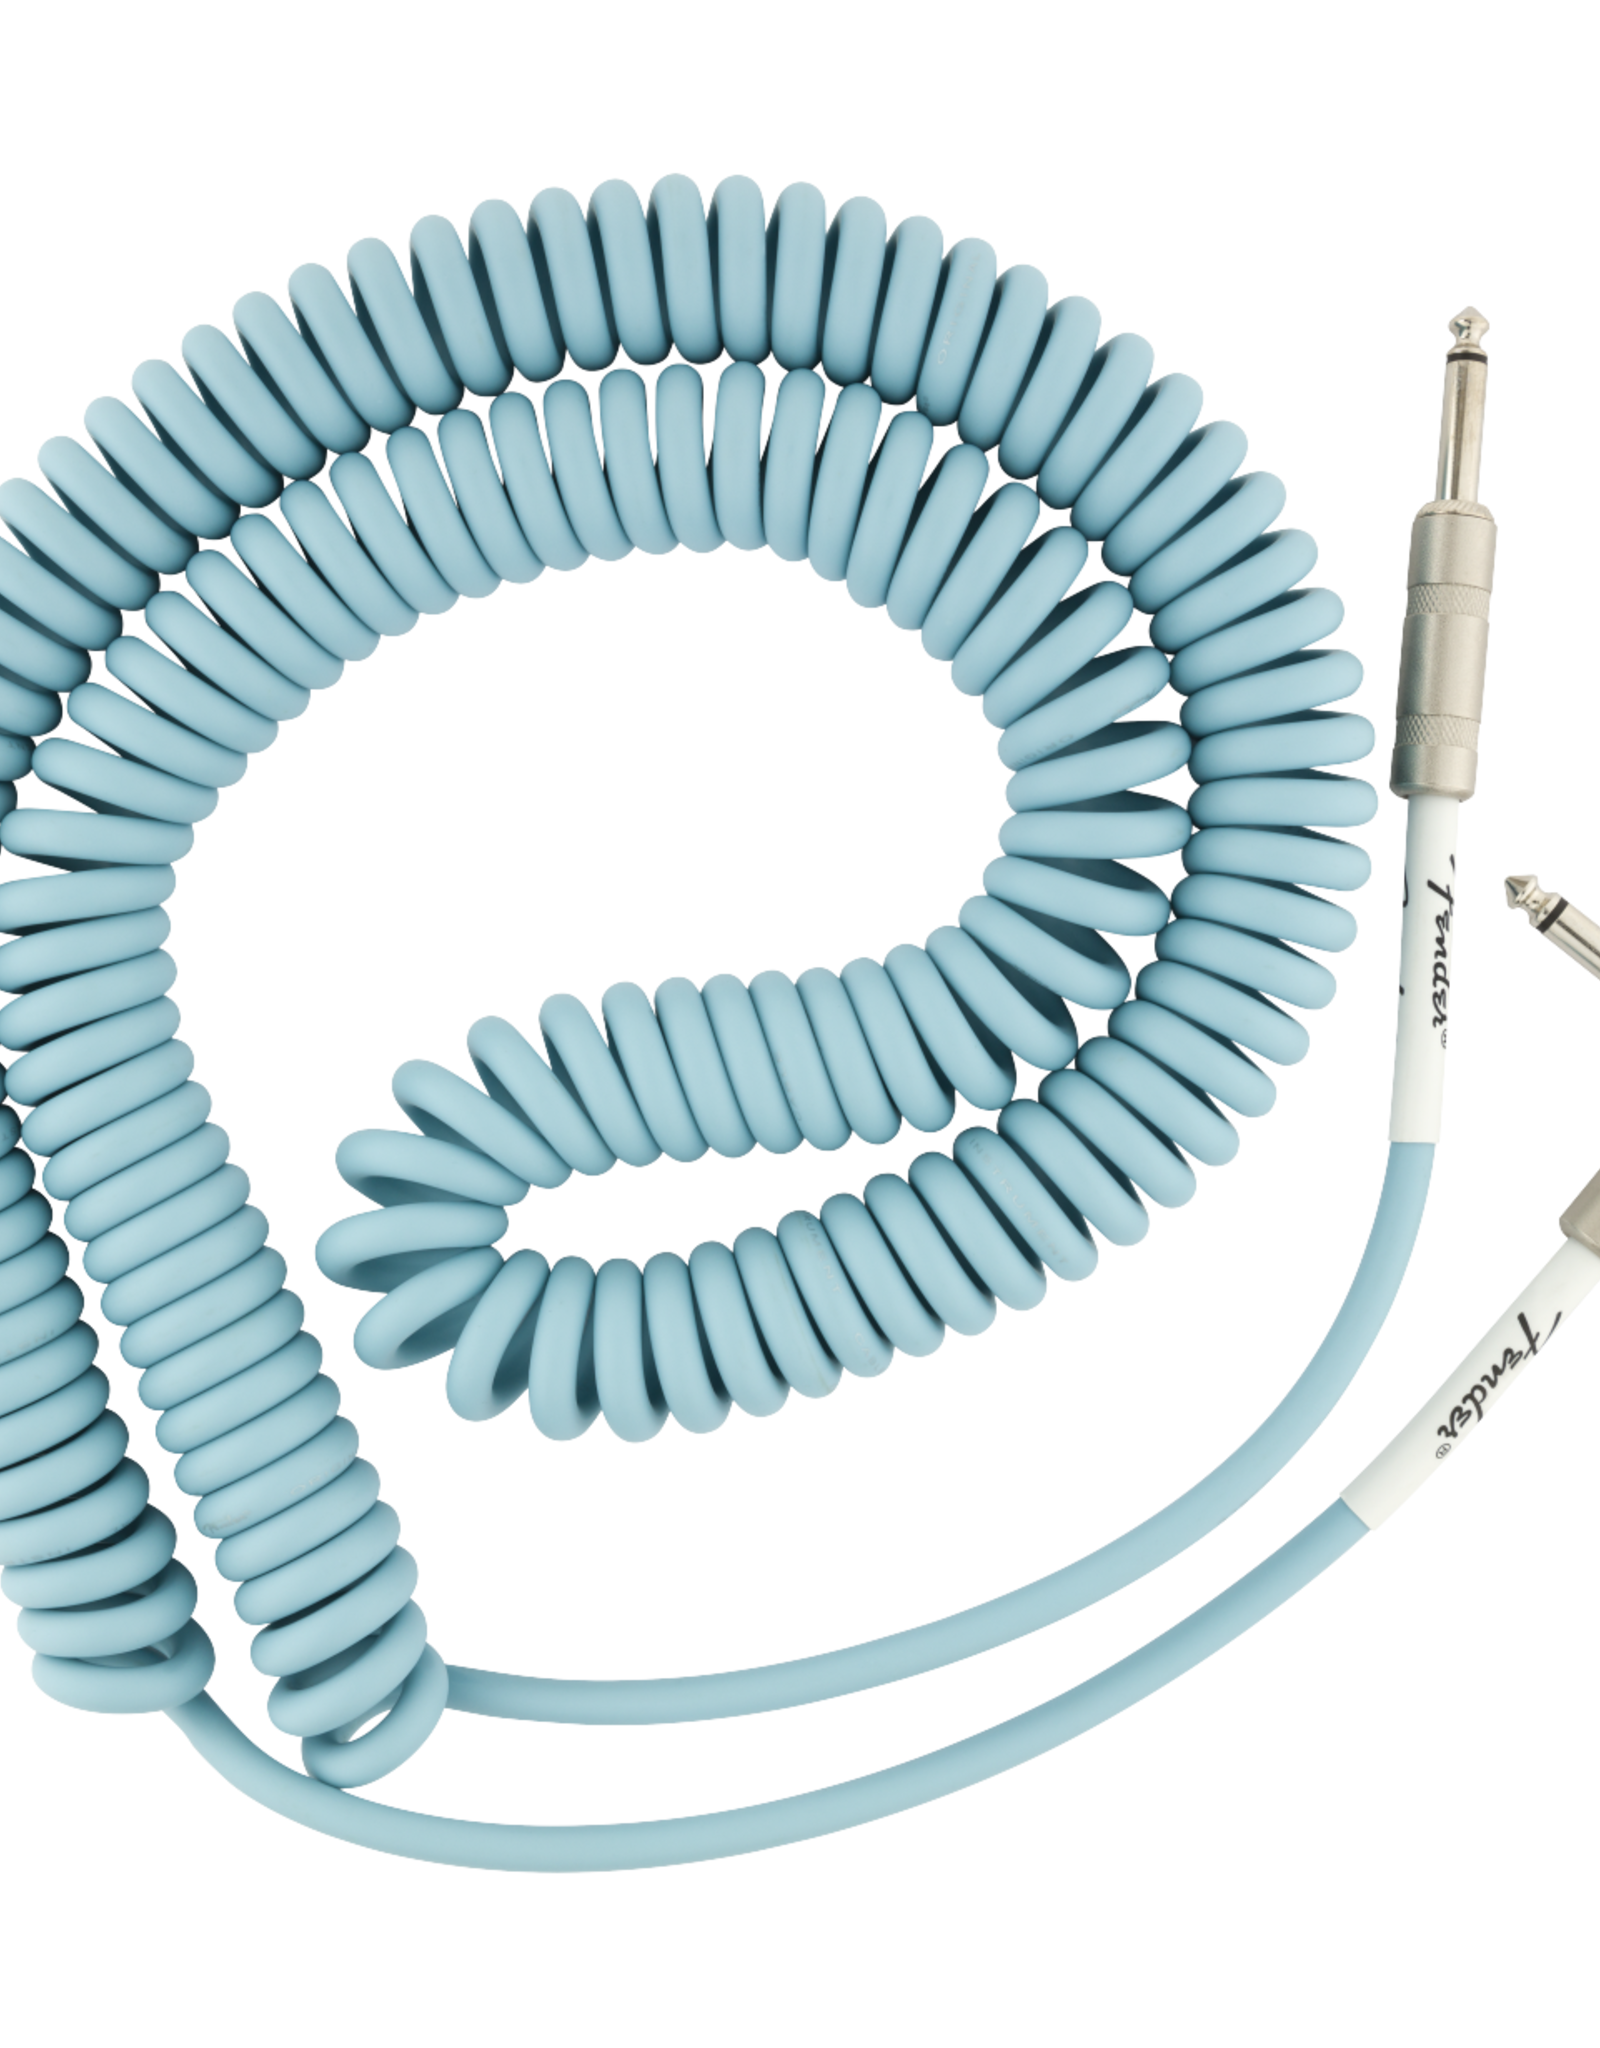 Fender Fender Original Series Coil Cable, Straight-Angle, 30', Daphne Blue